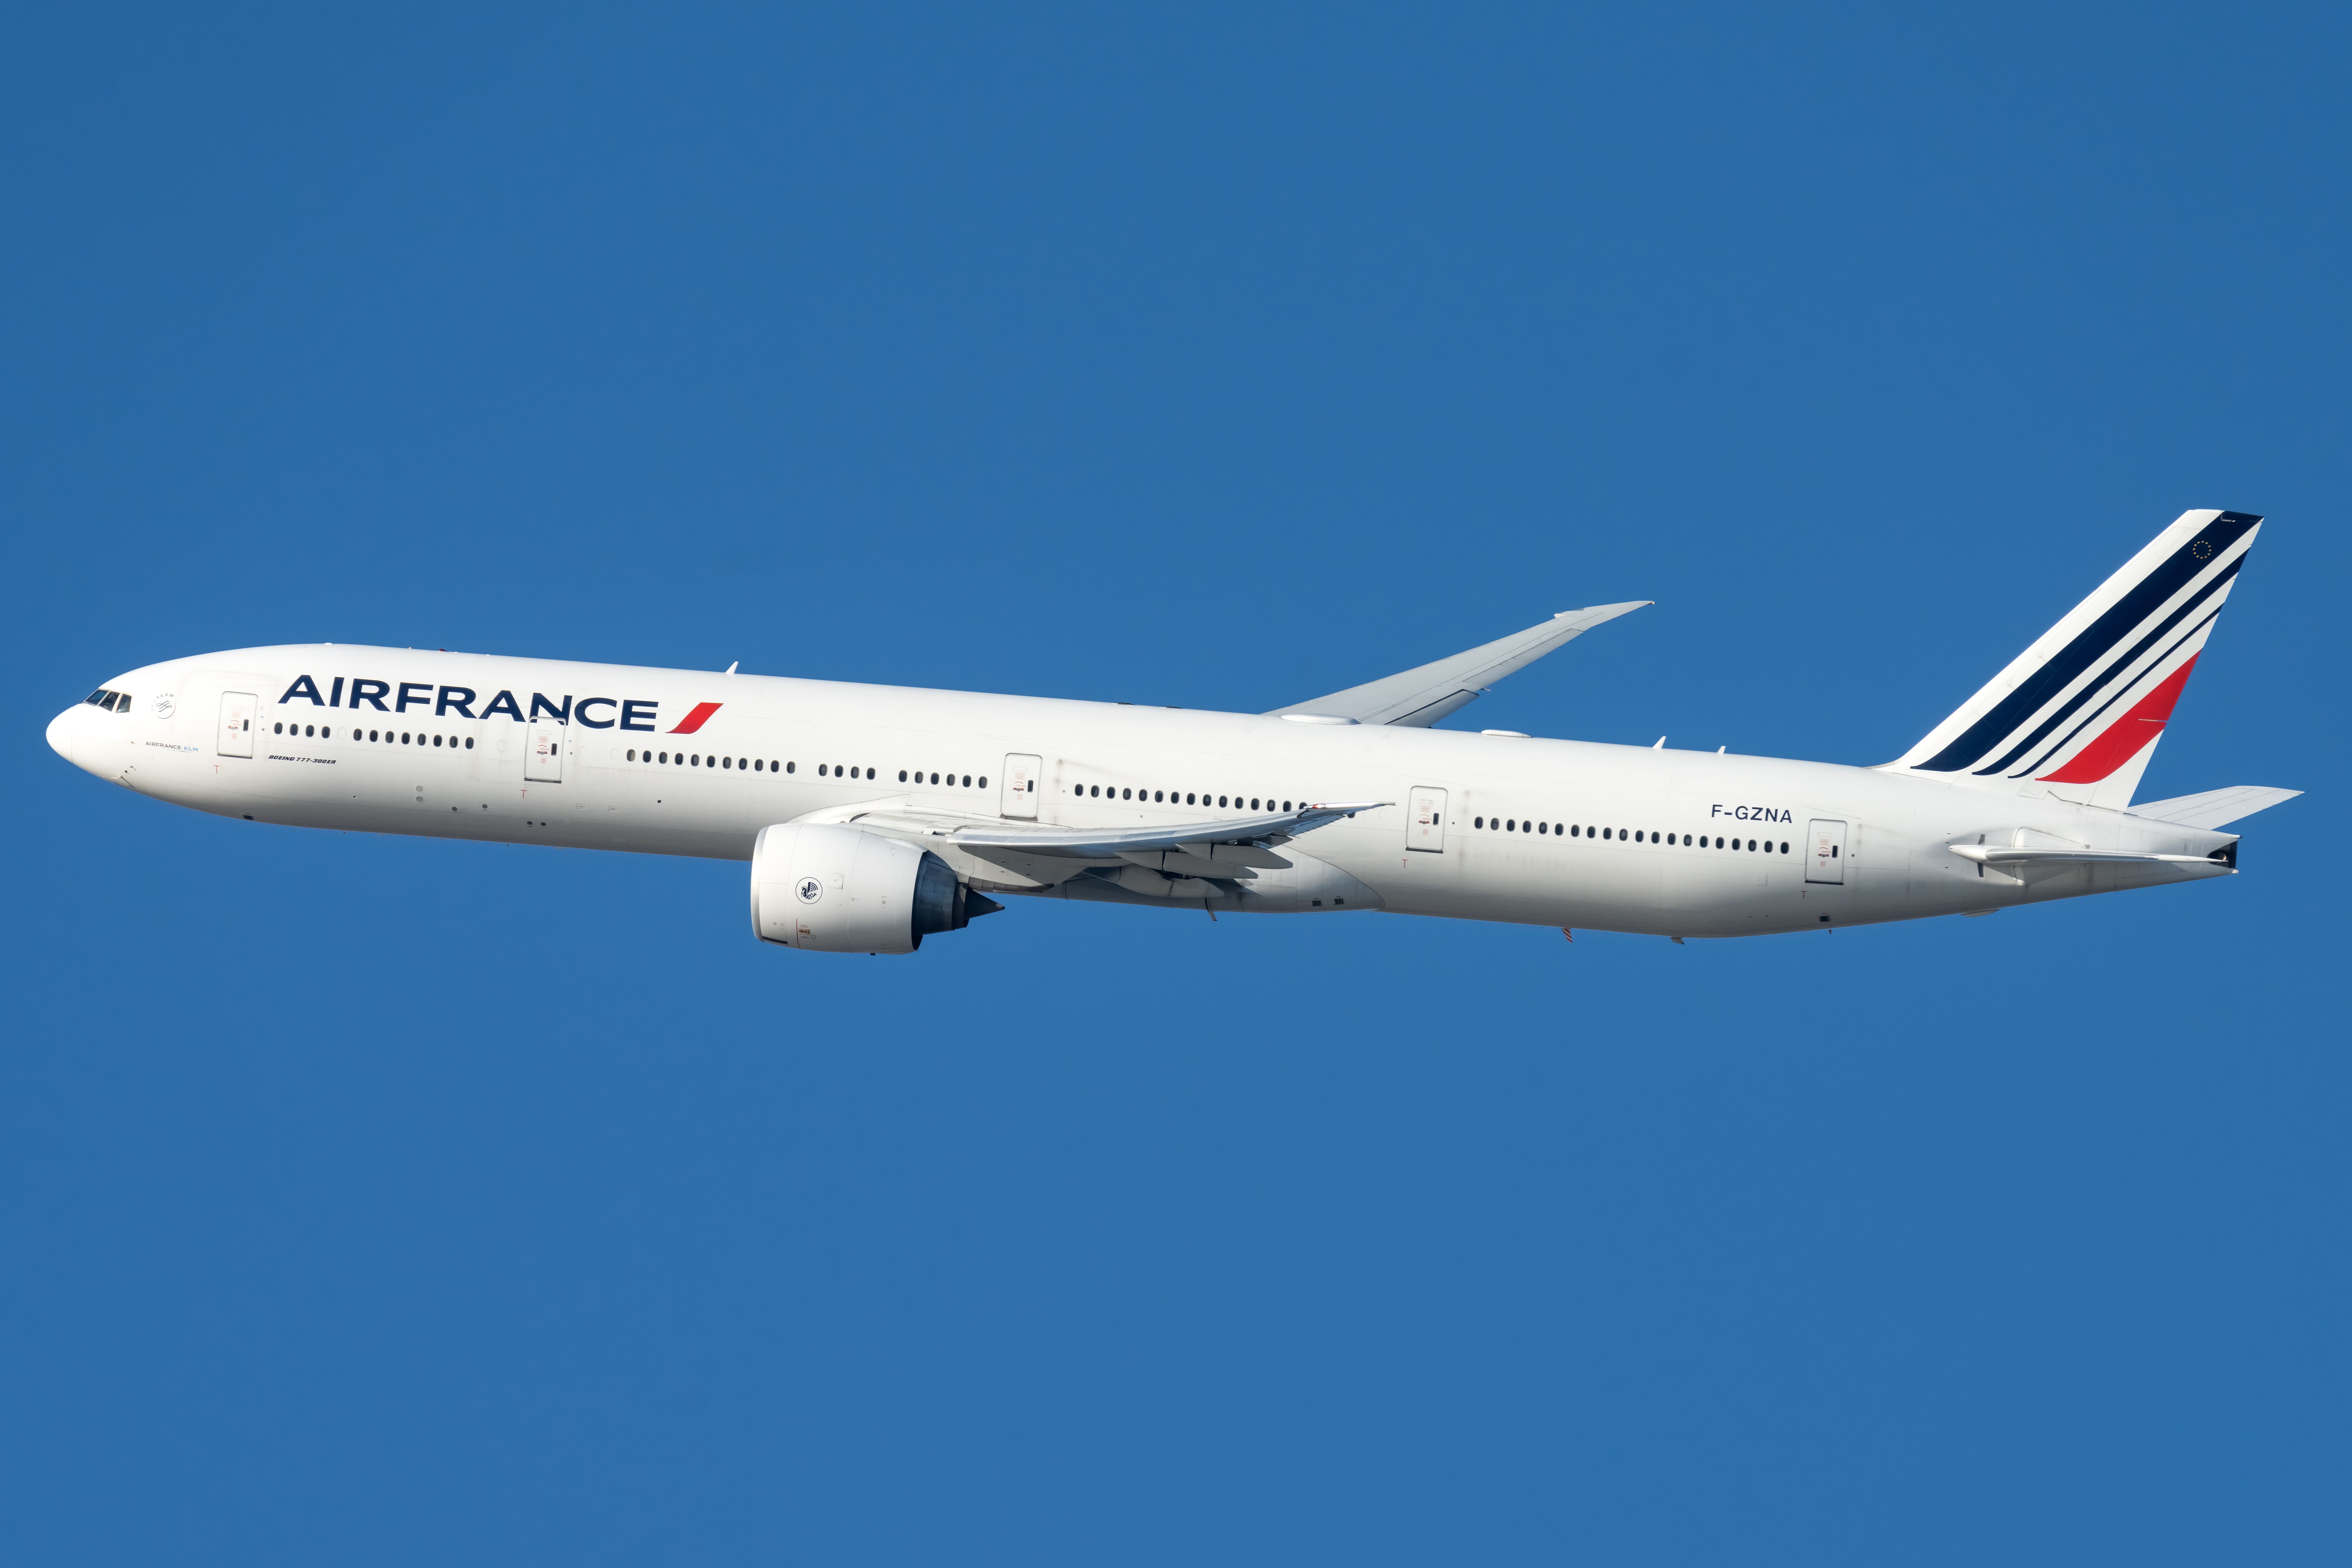 Air France Boeing 777-300 photographed in flight in front of a blue sky.